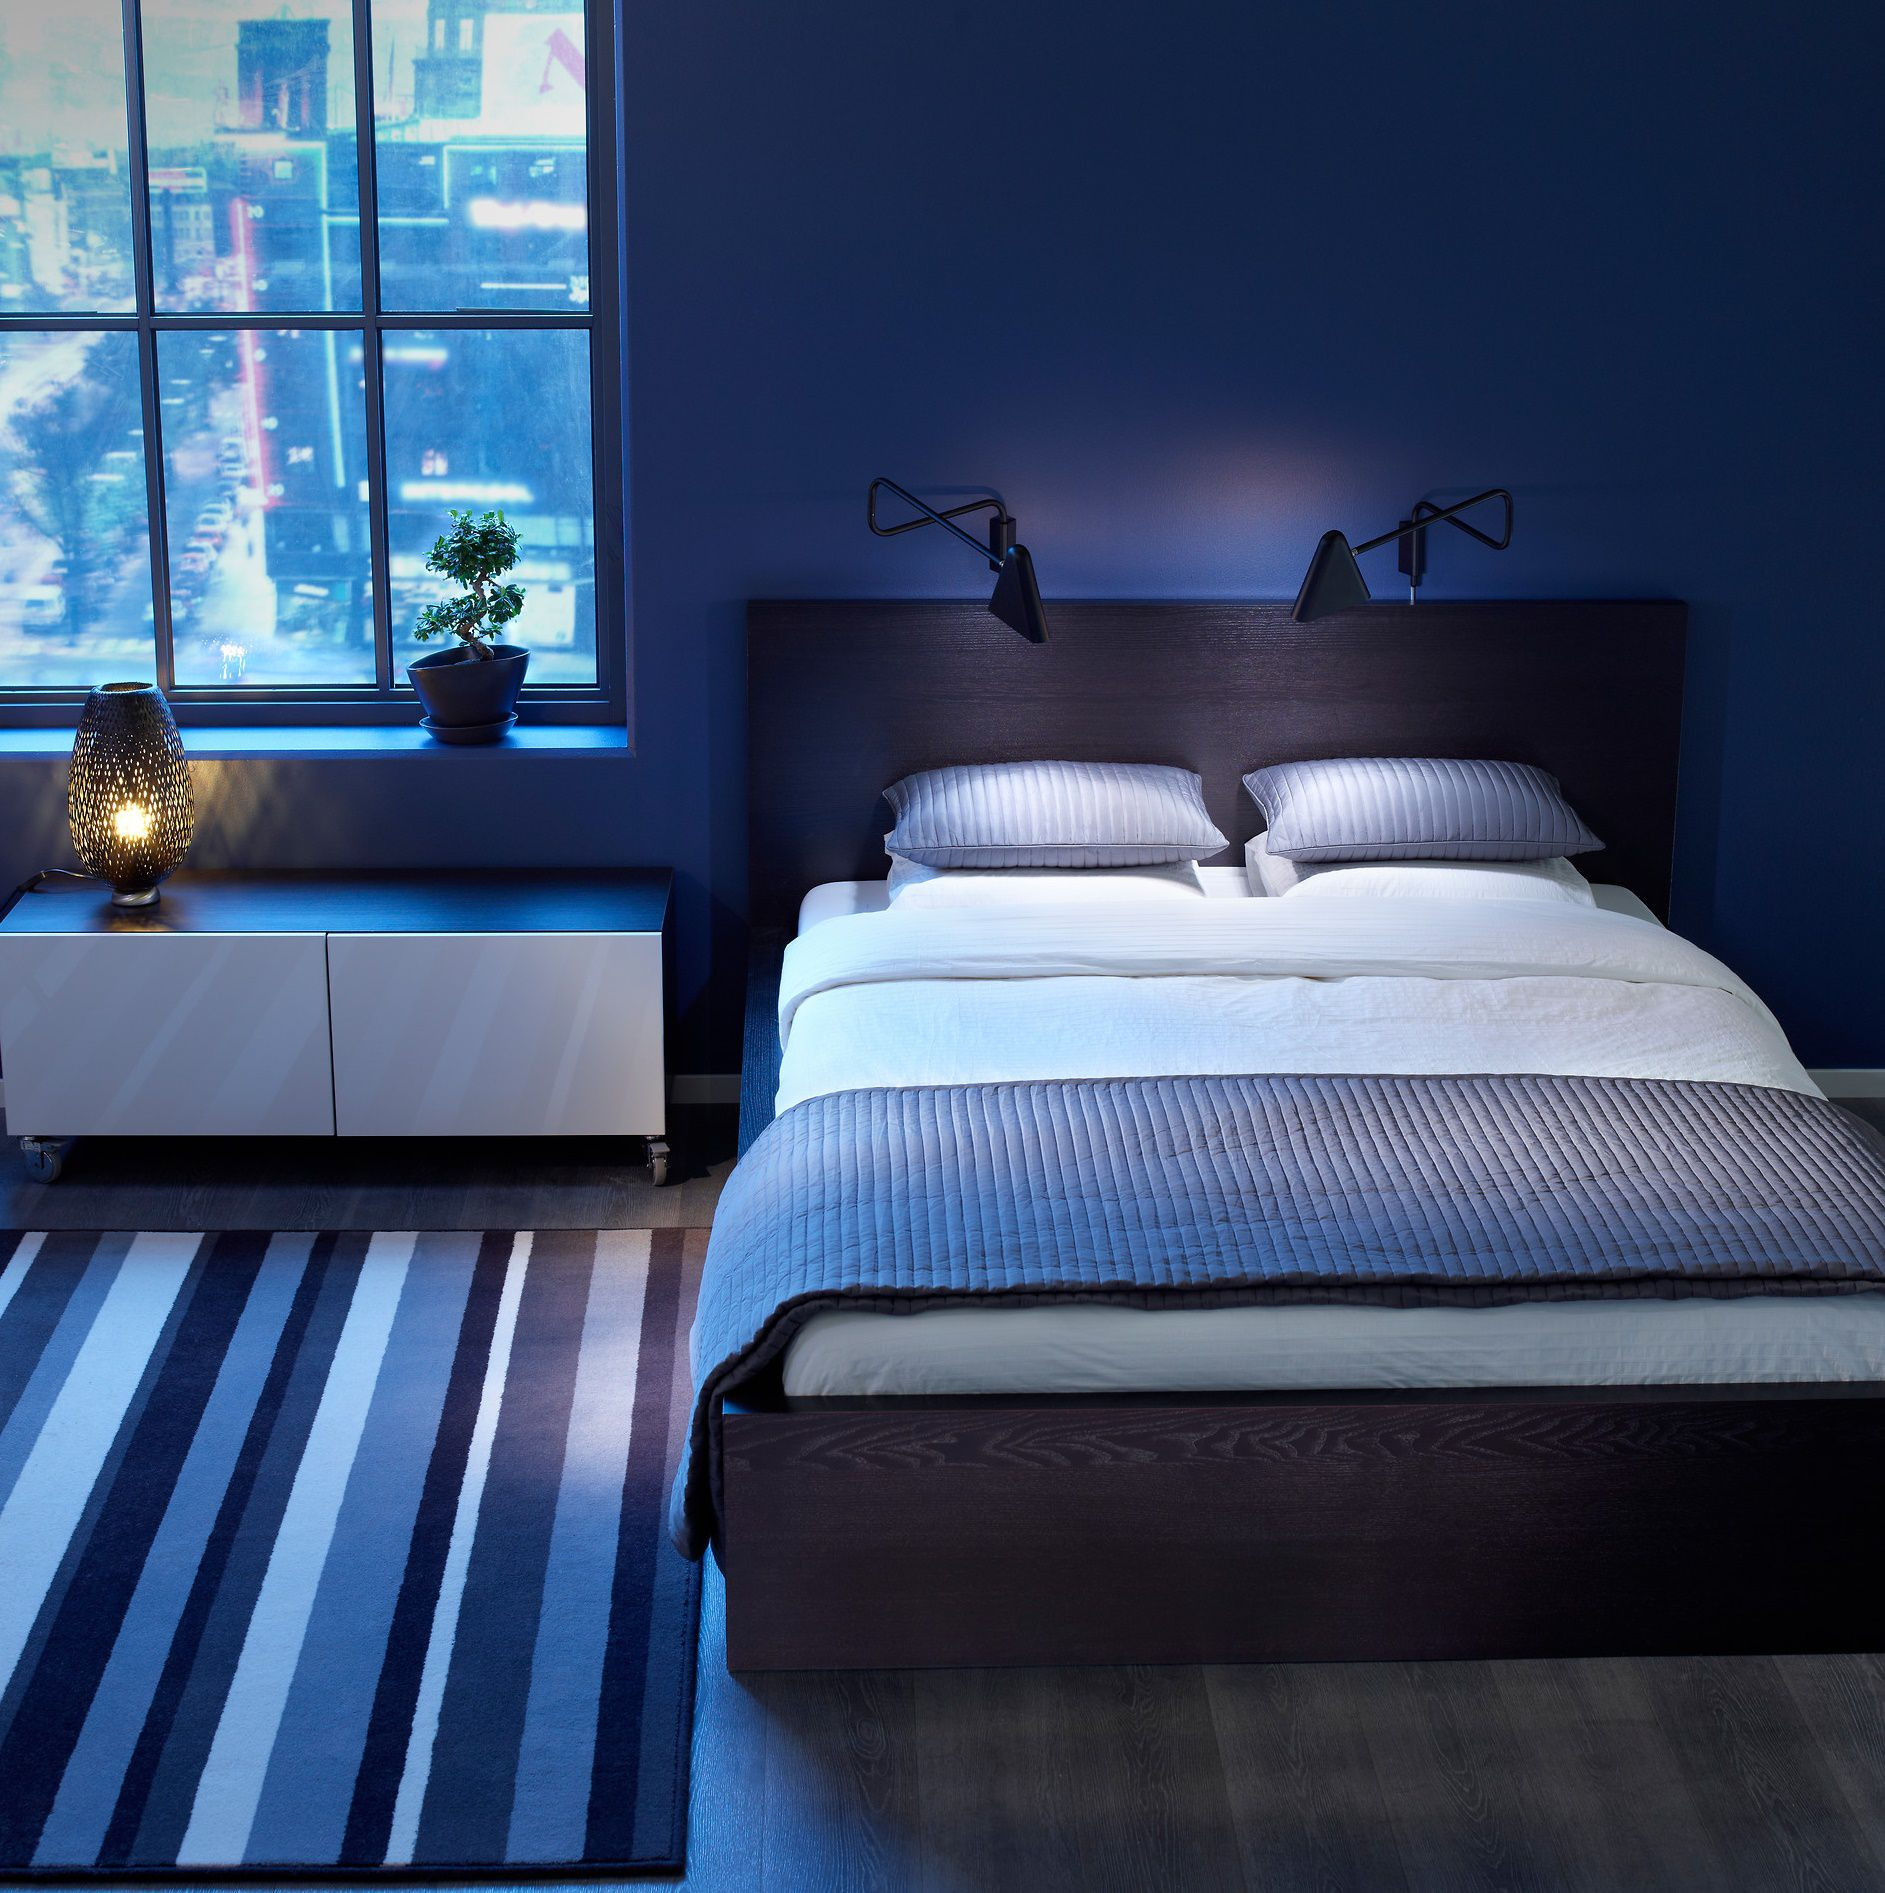 Bedroom With Blue Walls
 How to Apply the Best Bedroom Wall Colors to Bring Happy